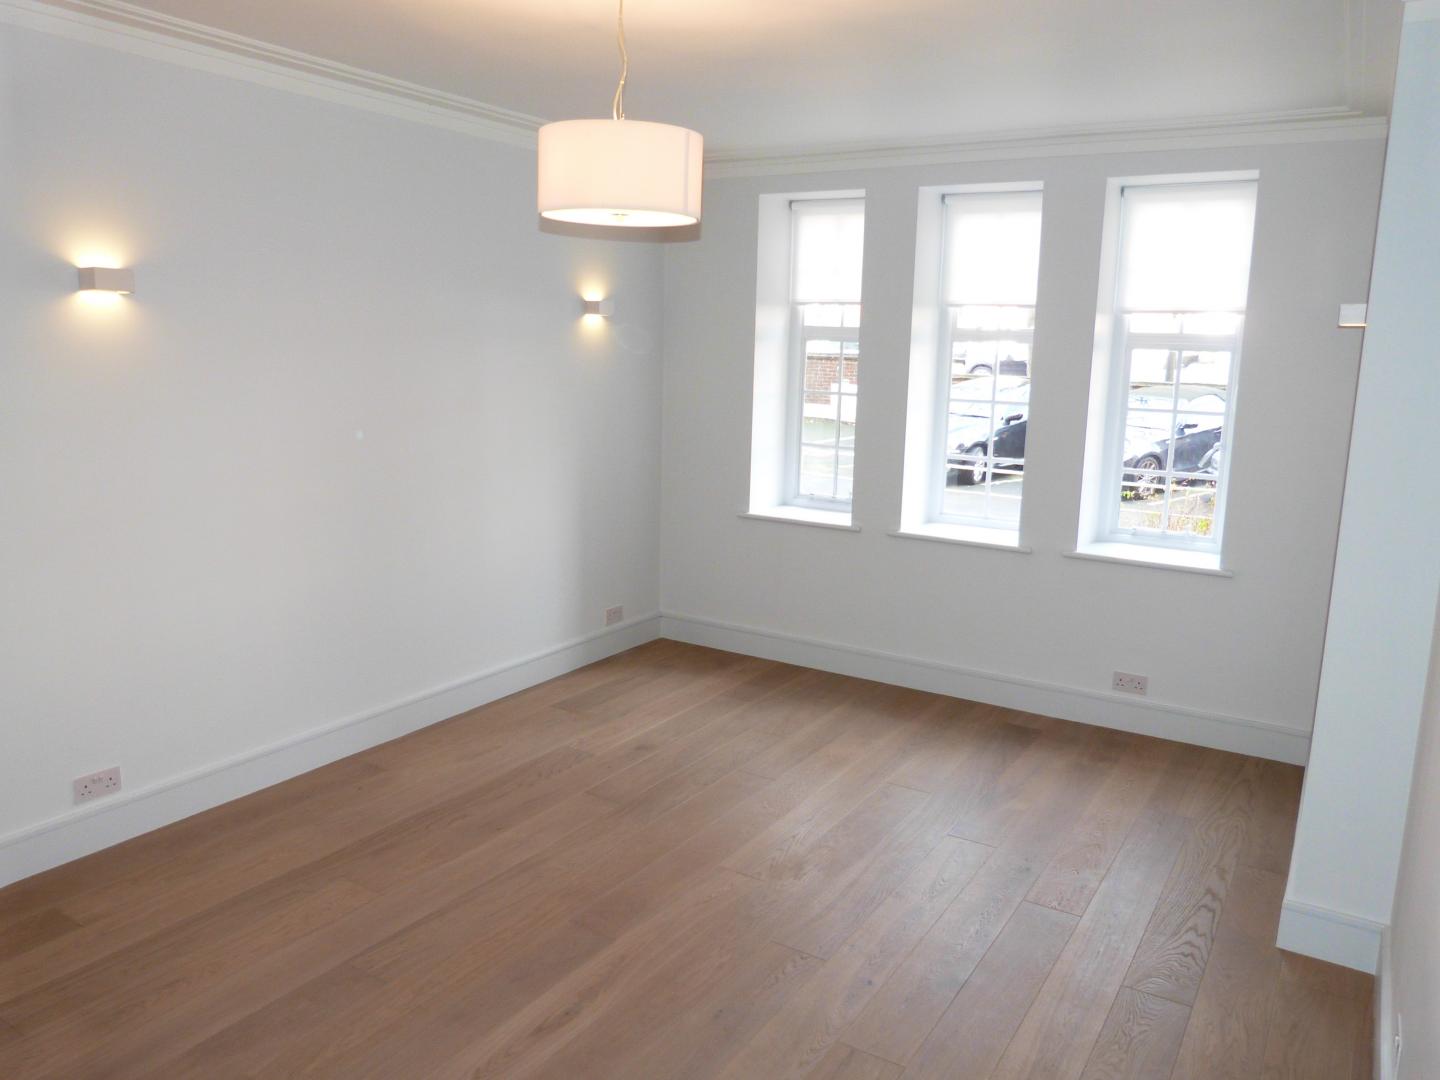 Recently refurbished two double bedroom property set in mansion bulding  Finchley Road, Finchley Road 